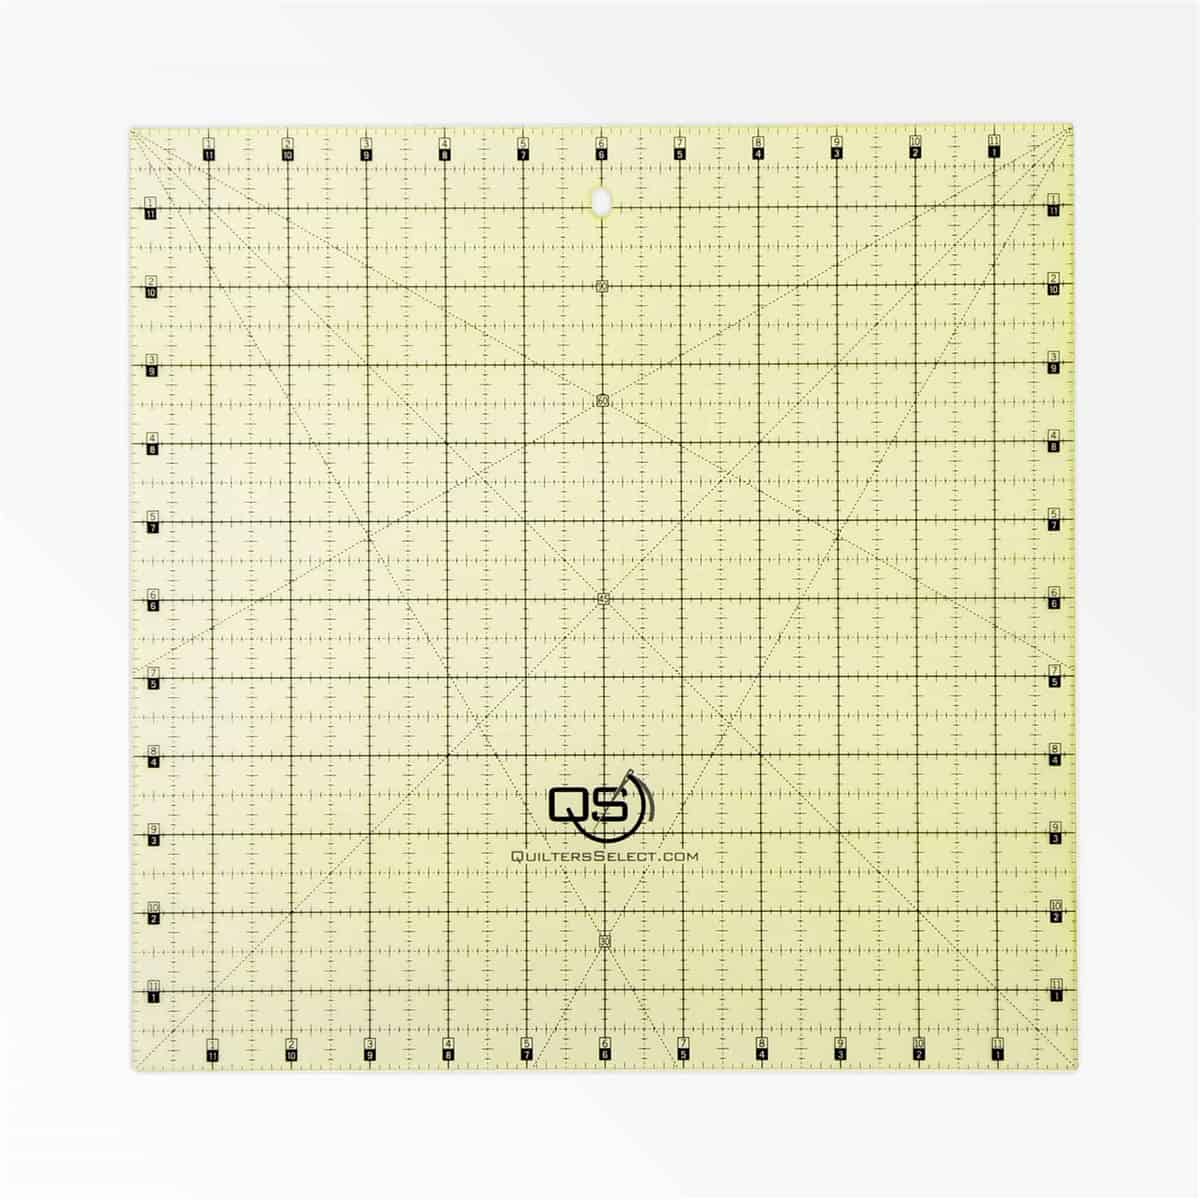 Sew Easy Quilters Graph Paper 12" x 12" inches